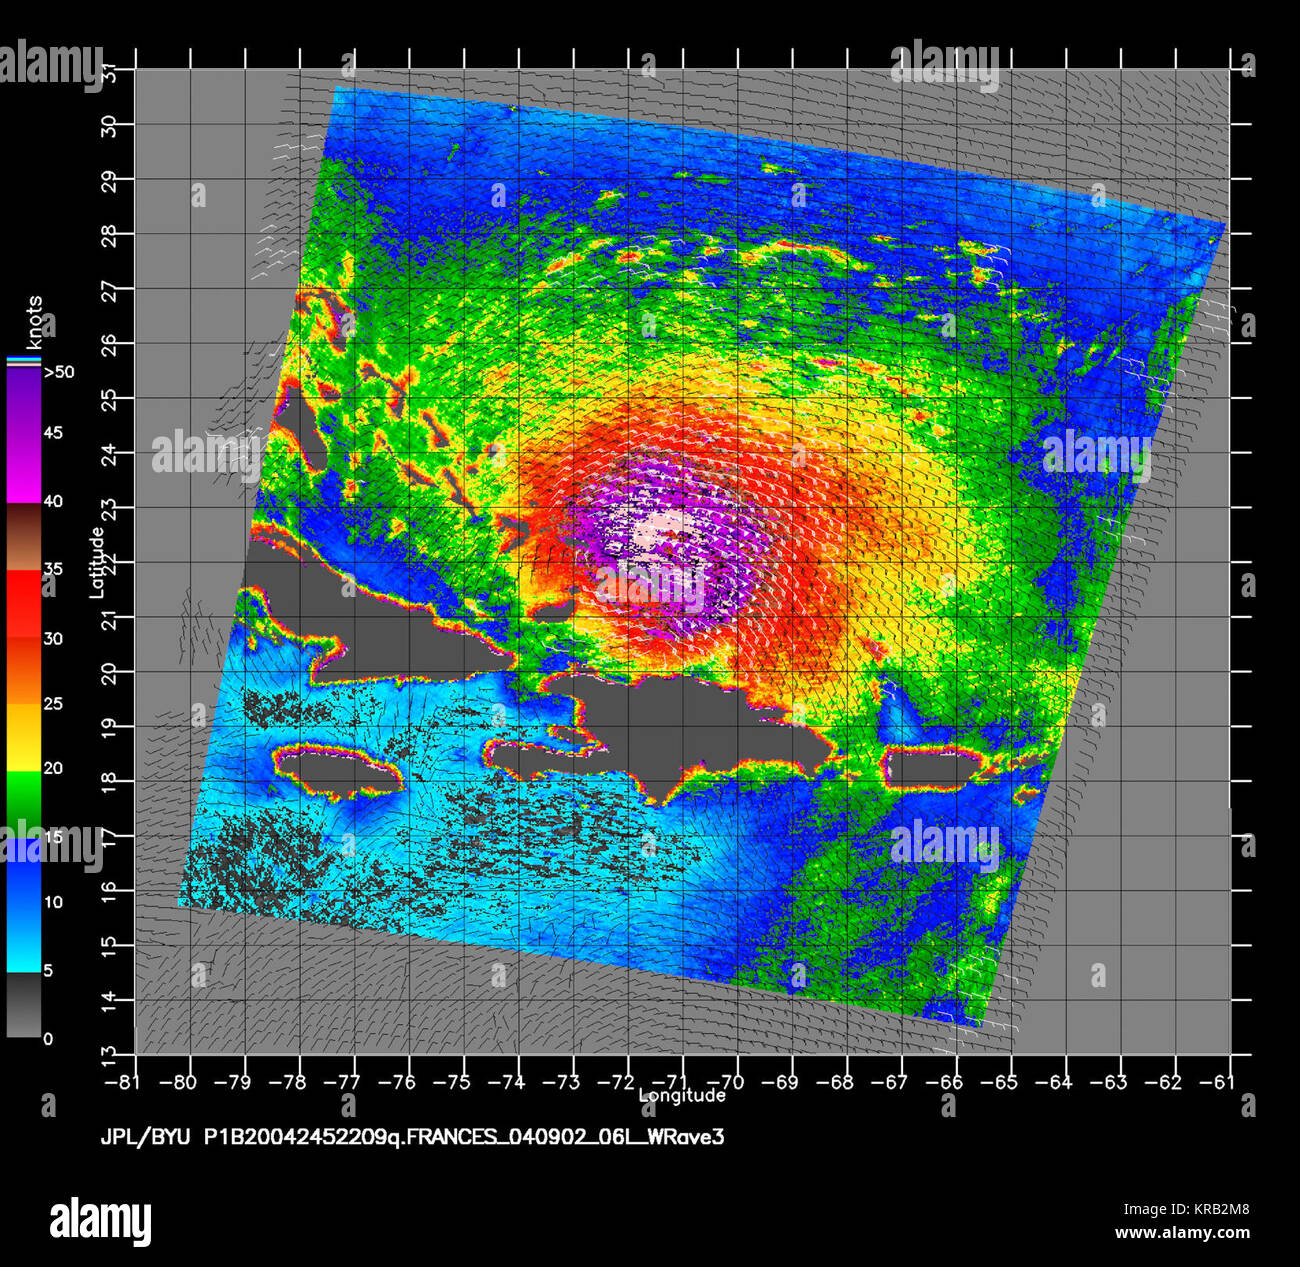 <p>The SeaWinds scatterometer aboard NASA's QuikSCAT satellite collected the data used to create this colorful image of hurricane Frances as it approached Cuba on September 1, 2004, at 6:09 p.m. EDT.  The colored background shows the near-surface wind speeds at 2.5 km resolution. The strongest winds, shown in purple, are at the center of the storm, with gradually weakening winds forming rings around the center. The black barbs indicate wind speed and direction at QuikSCAT's nominal 25 km resolution; white barbs indicate areas of heavy rain. The black grid over the image show degrees of latitud Stock Photo